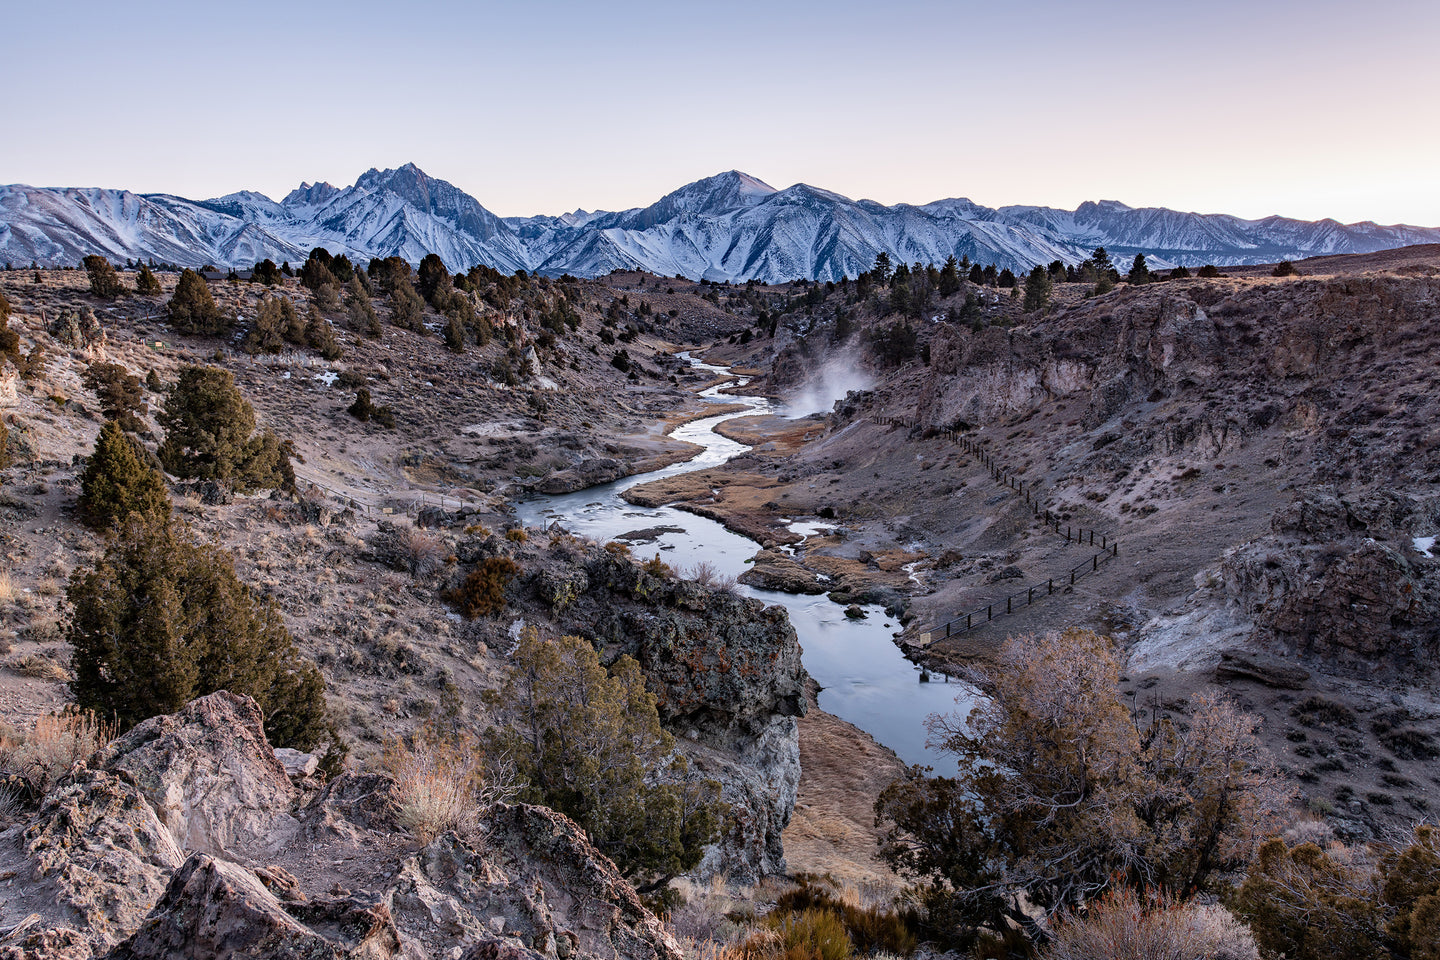 Brees Lookout at Hot Creek in Mammoth Lakes, California